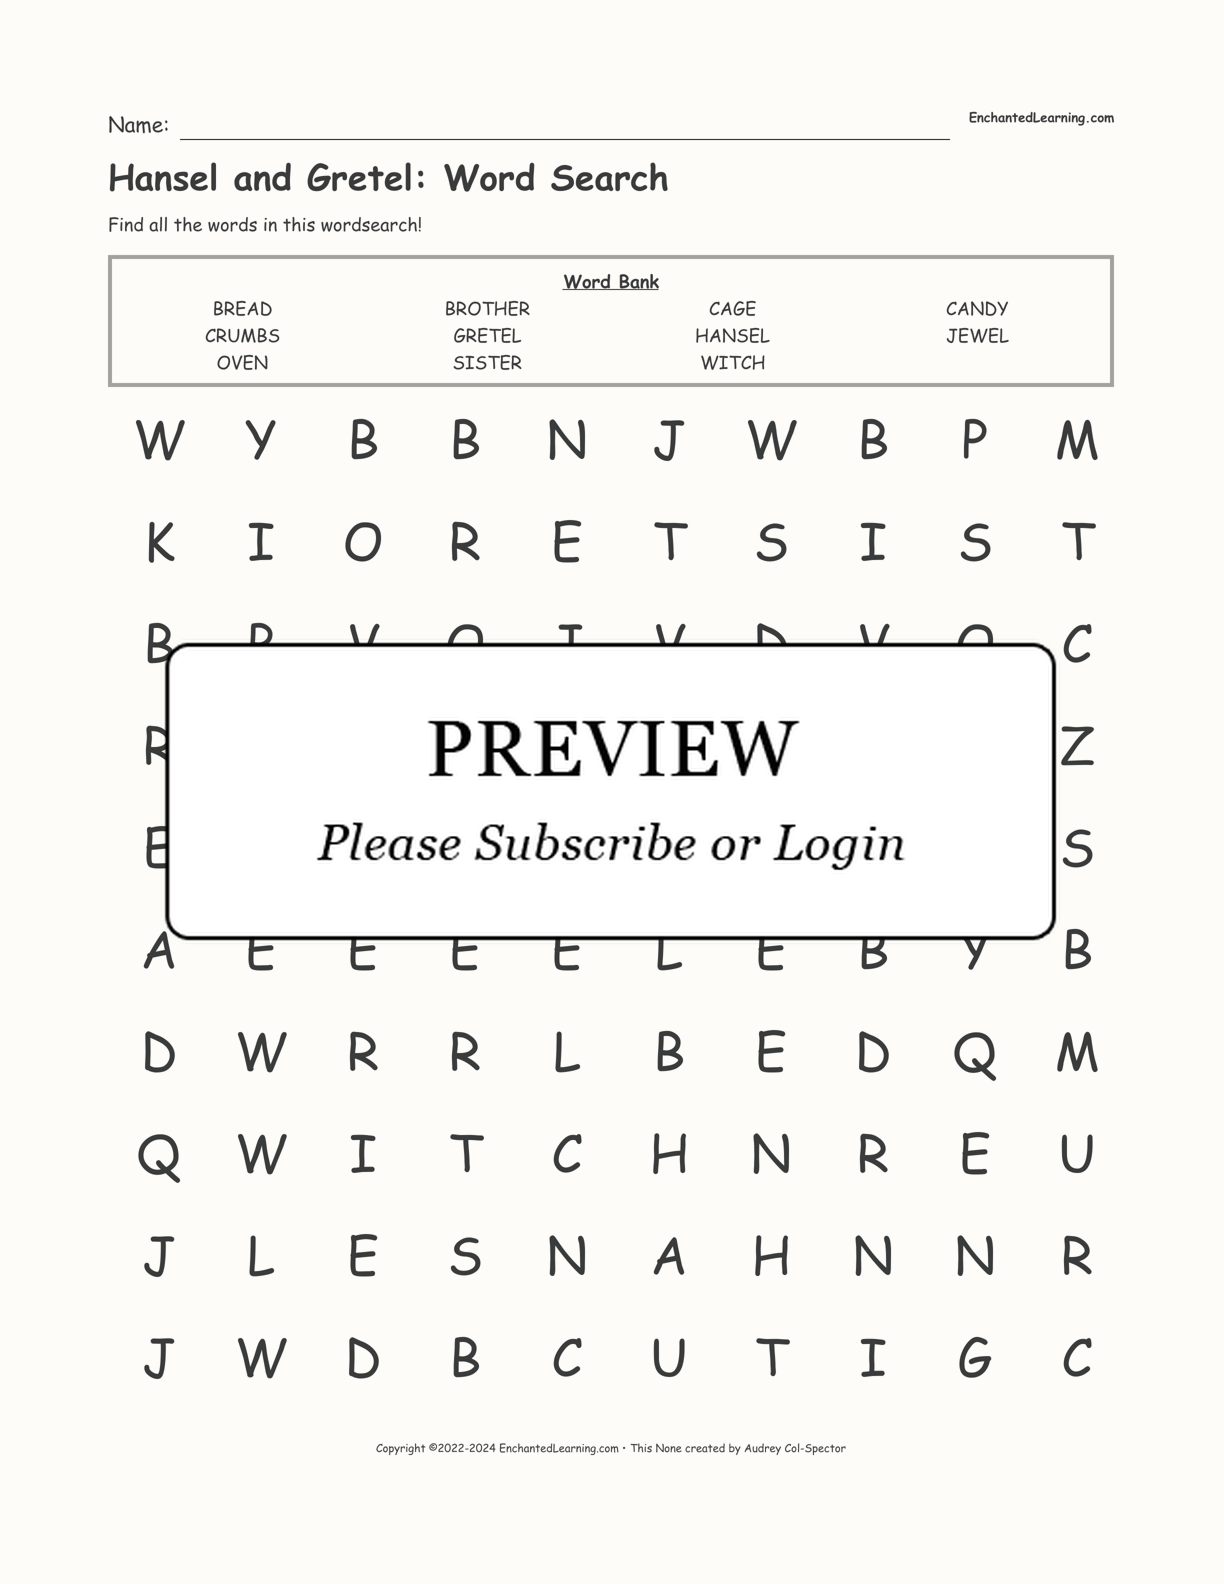 Hansel and Gretel: Word Search interactive worksheet page 1